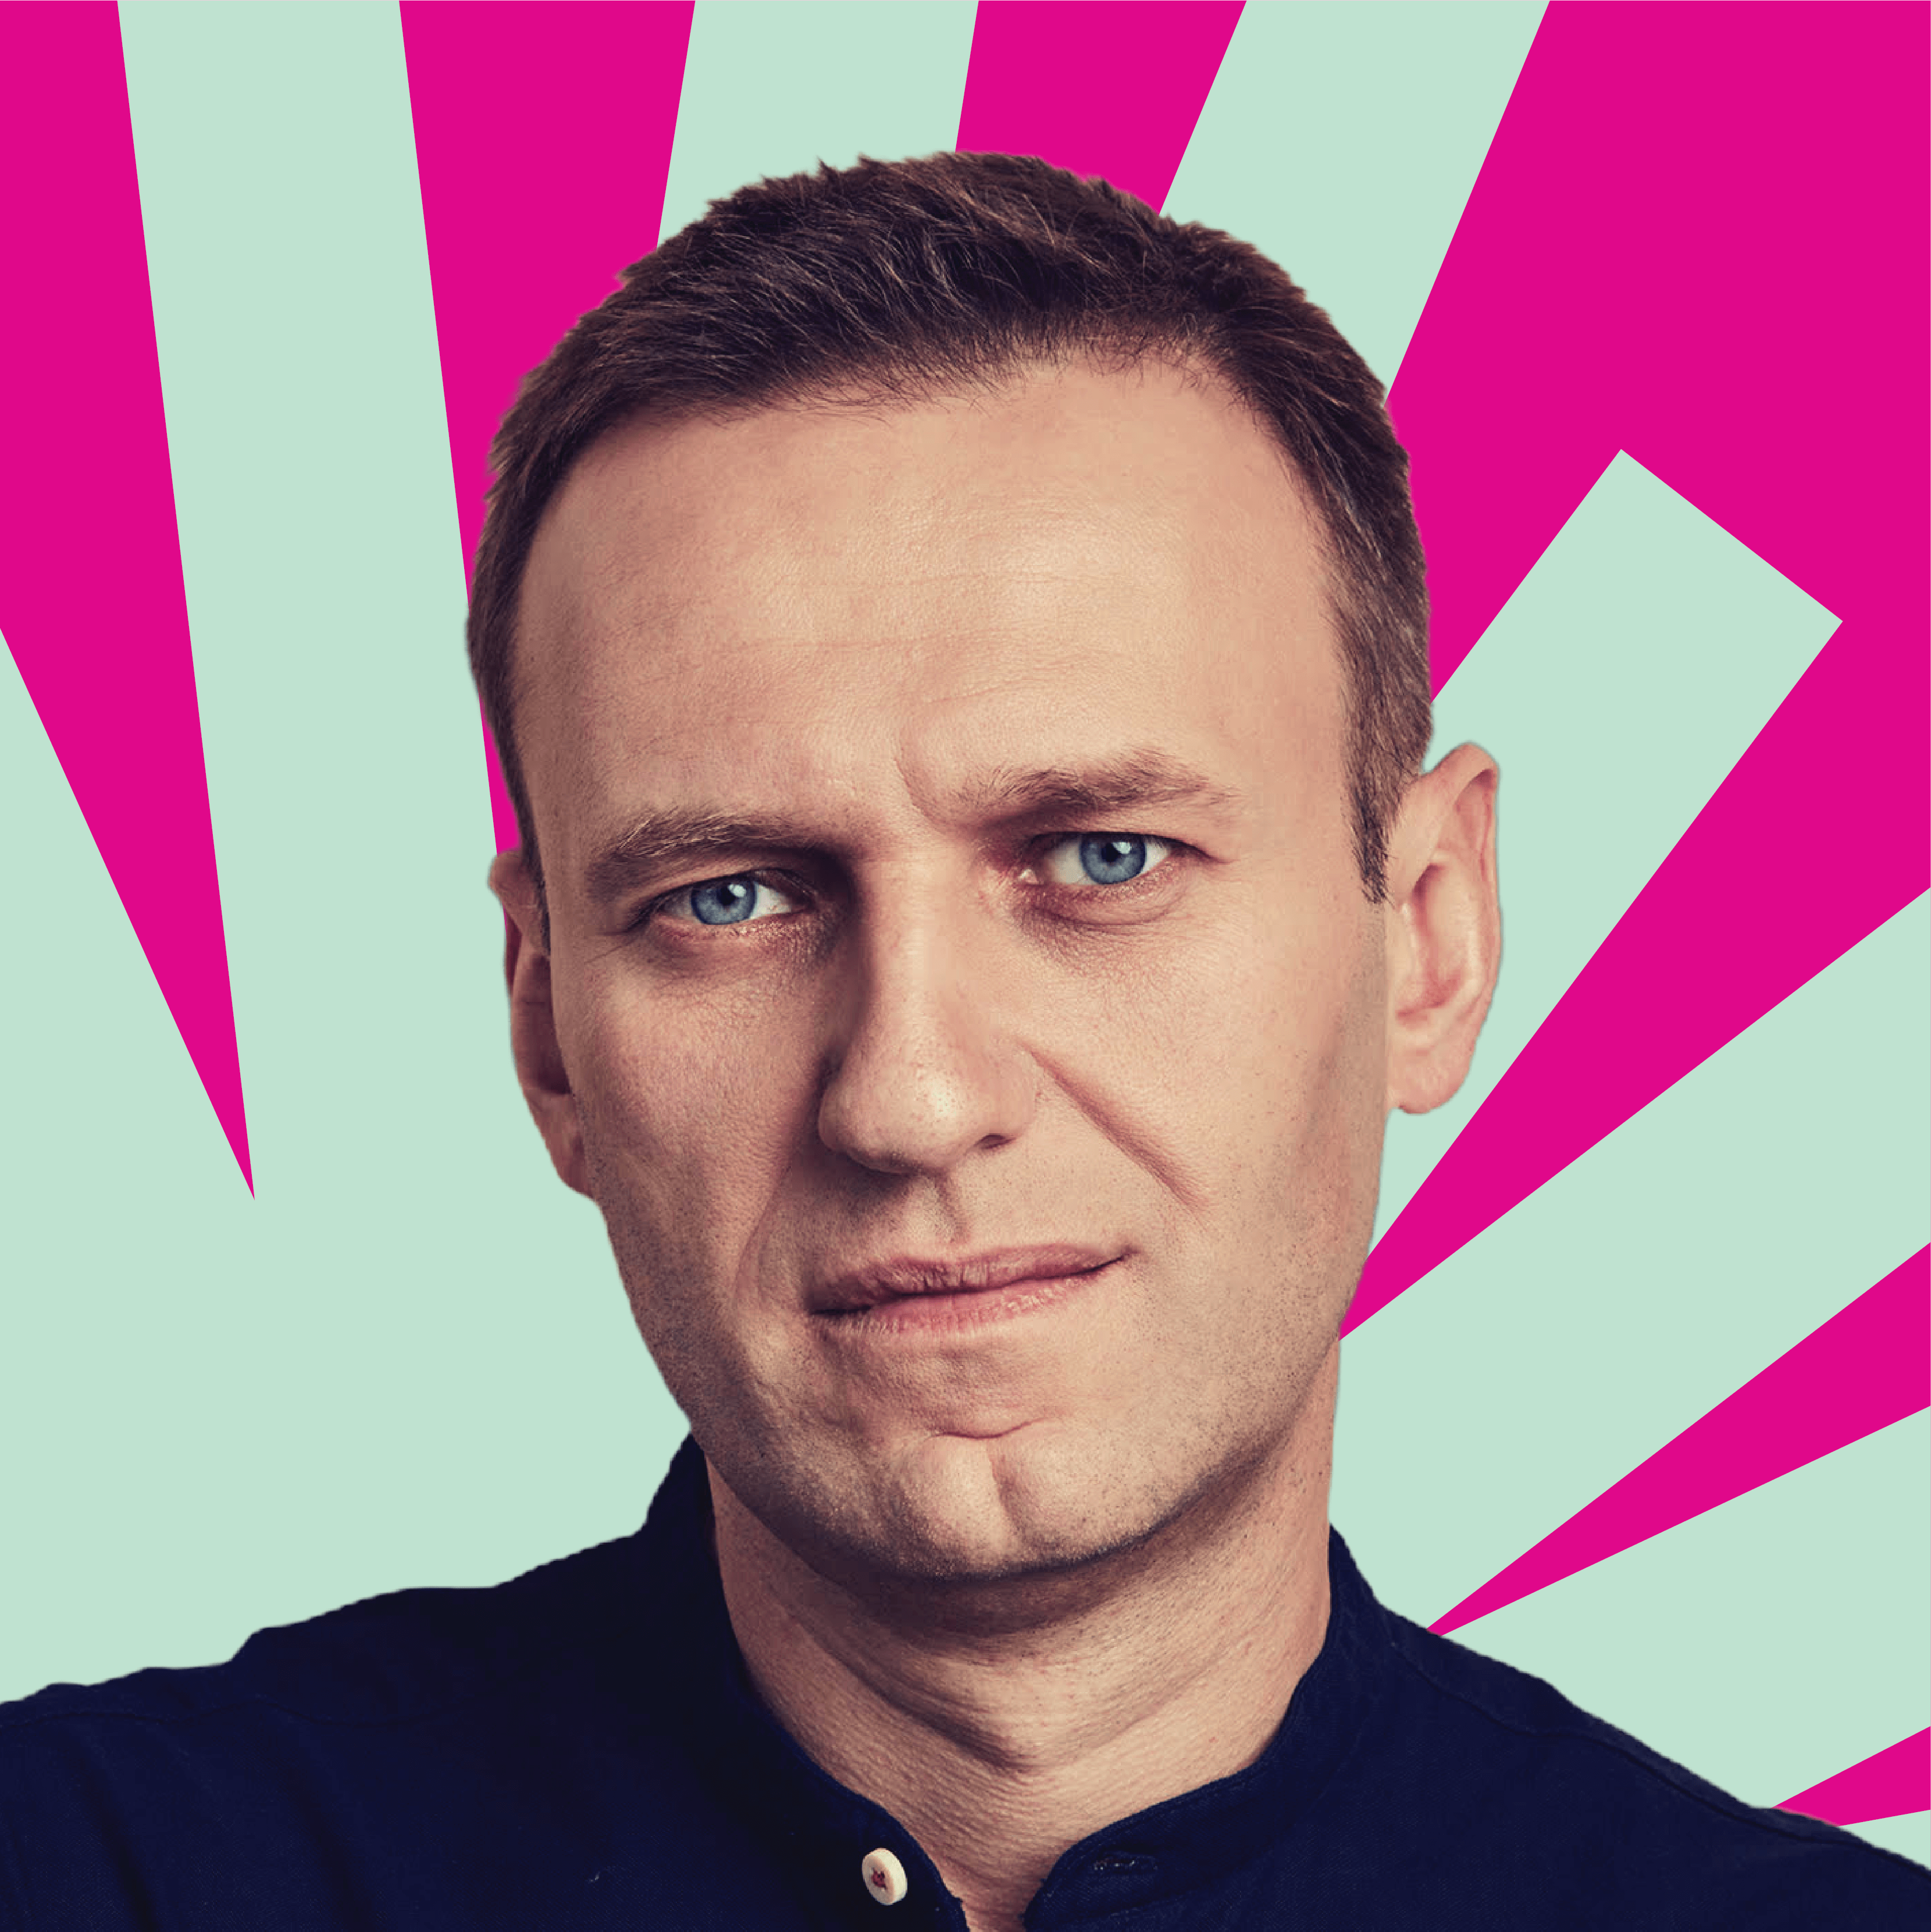 Announcing a Speech by Alexey Navalny at the 2021 Oslo Freedom Forum